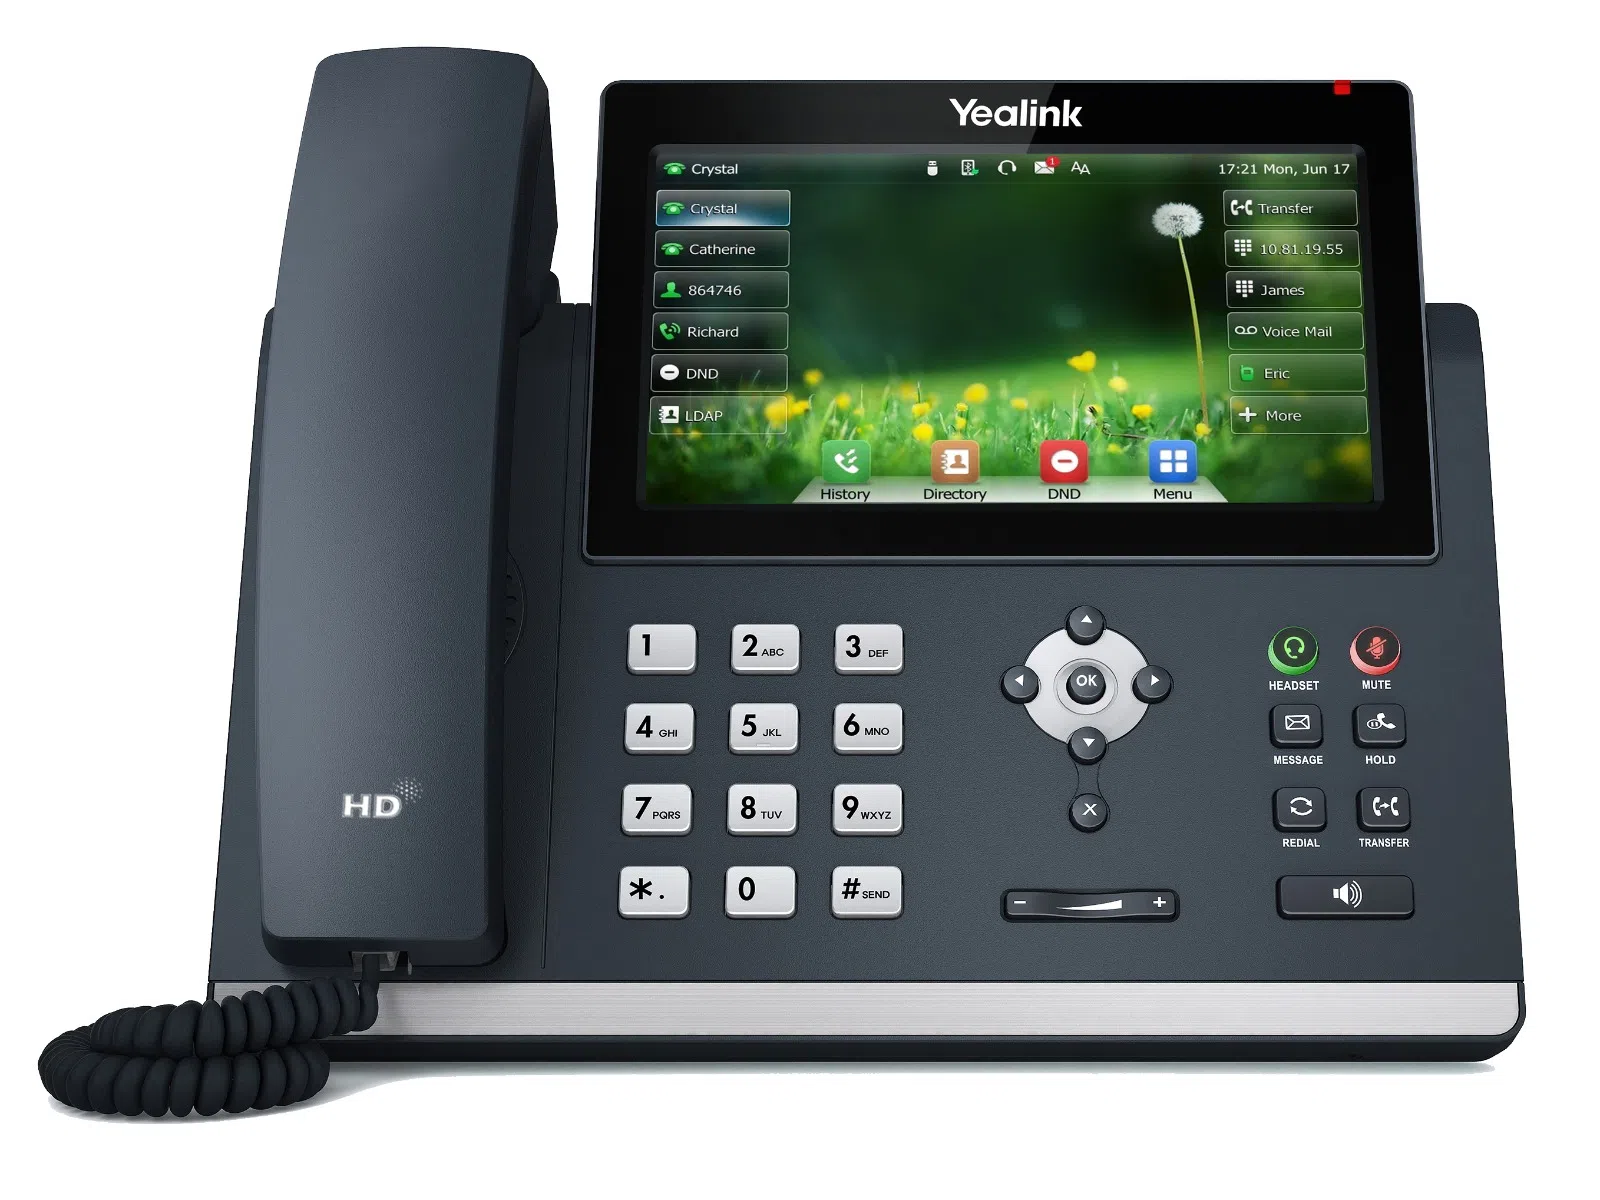 Can you provide the admin password for the Yealink T48U Touchscreen IP Phone 1301204?